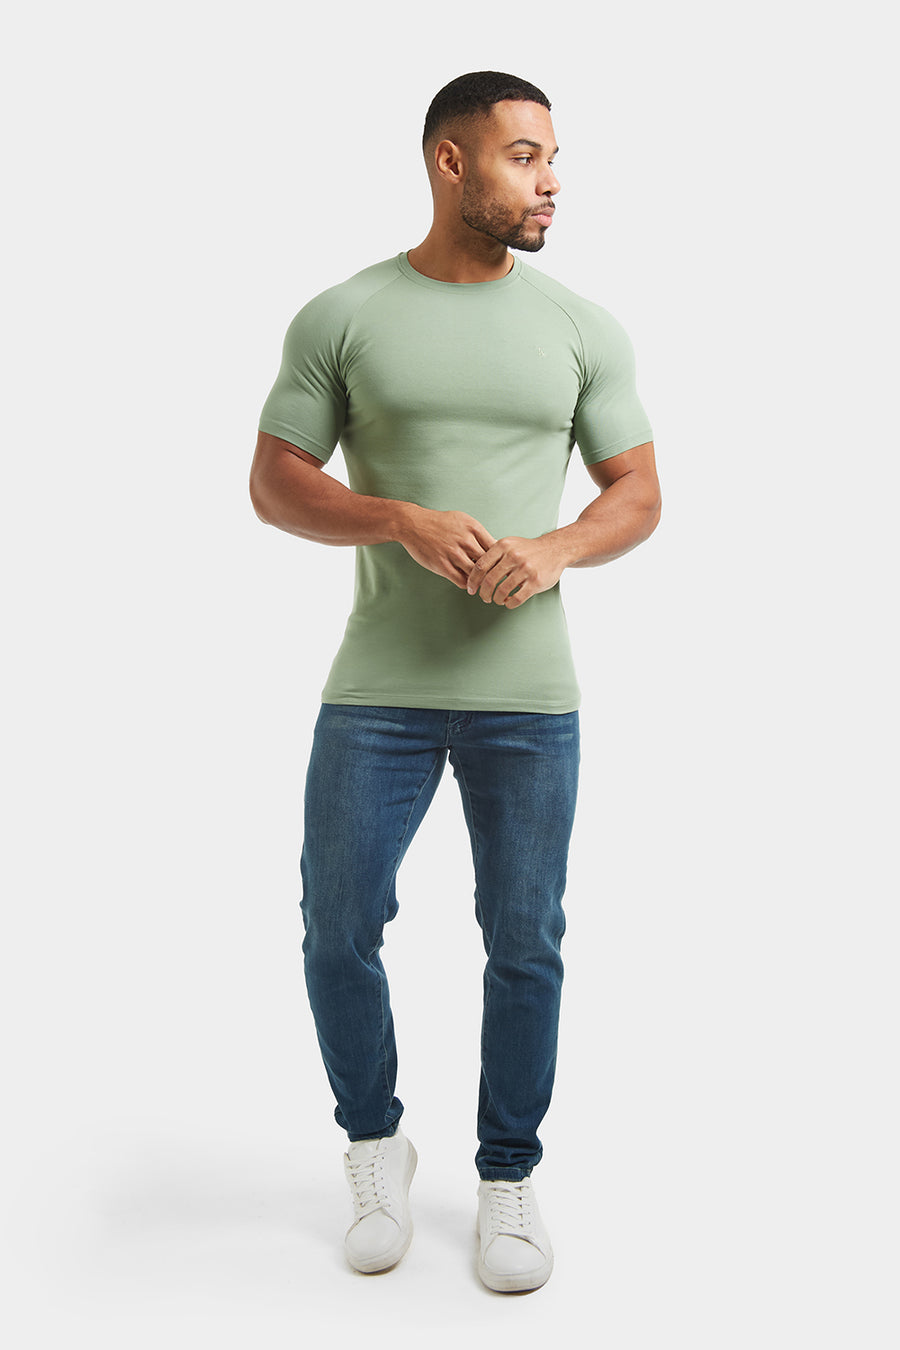 Athletic Fit T-Shirt in Sage - TAILORED ATHLETE - USA